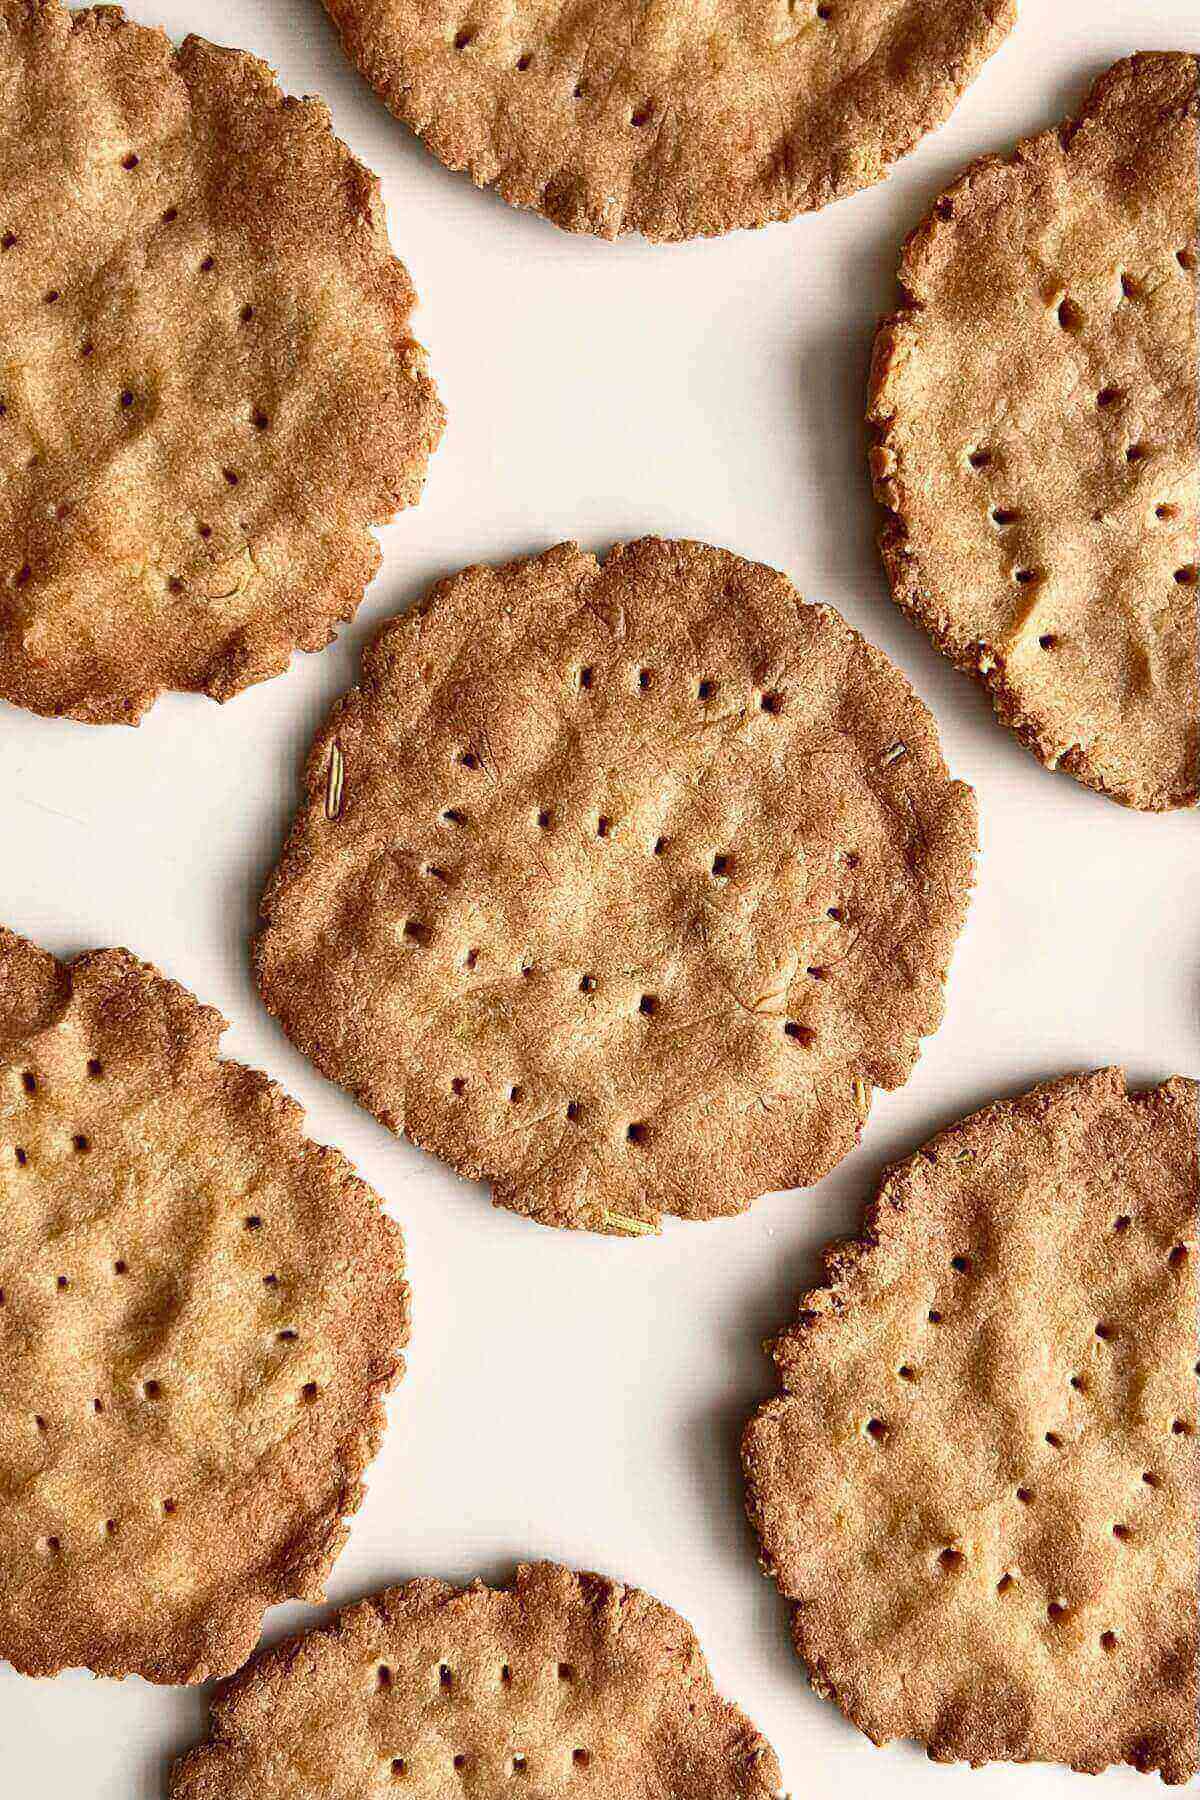 Light brown crackers on a white plate.